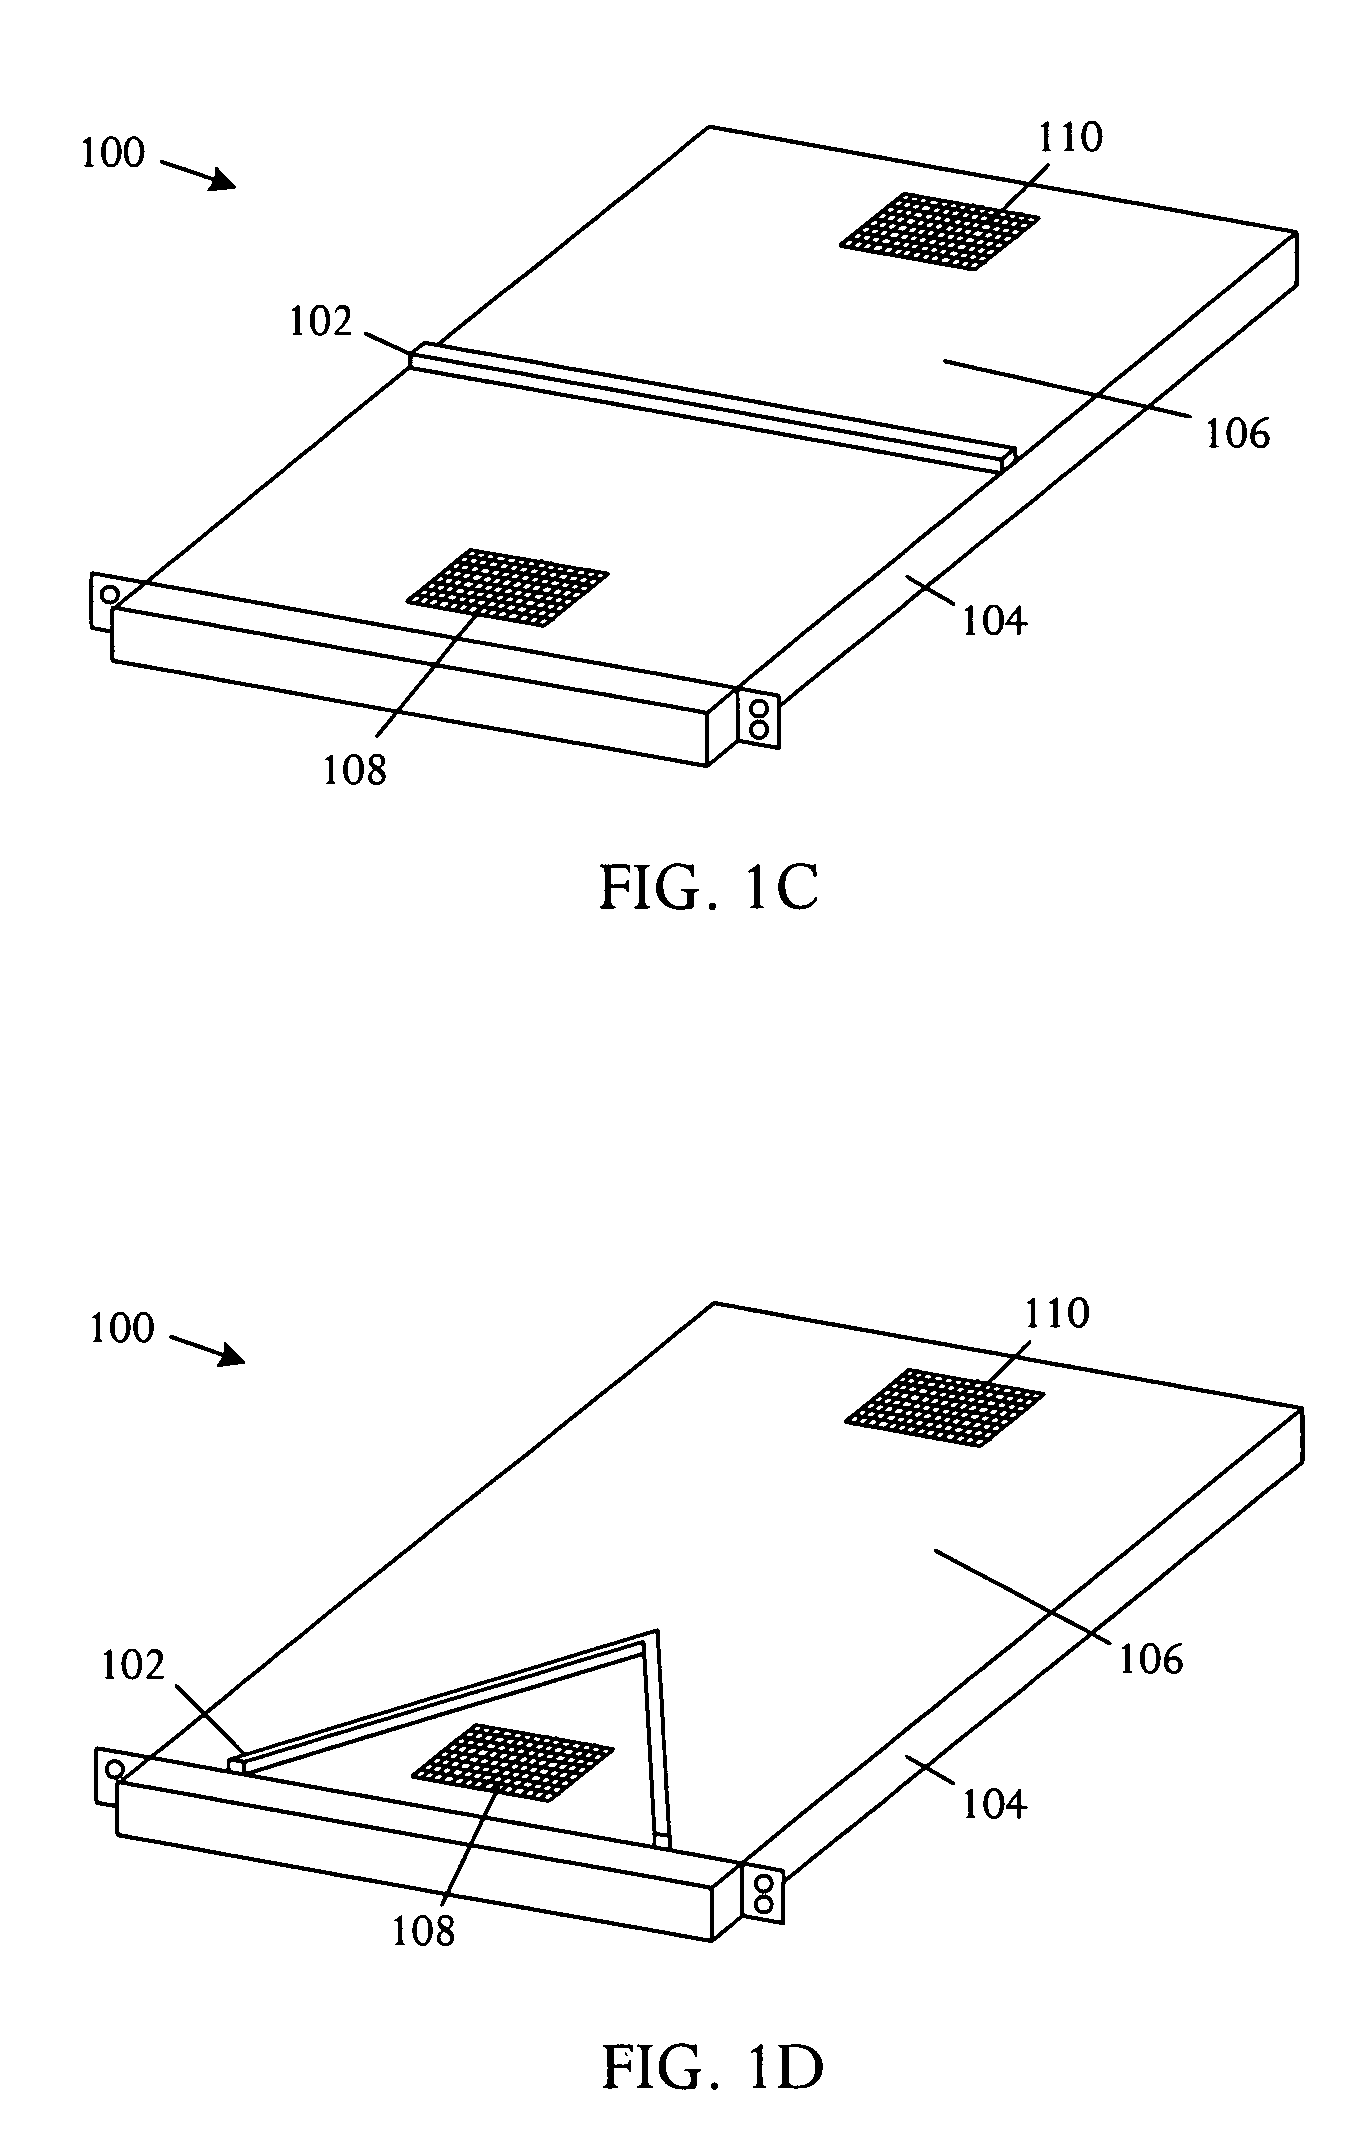 Air baffle for managing cooling air re-circulation in an electronic system